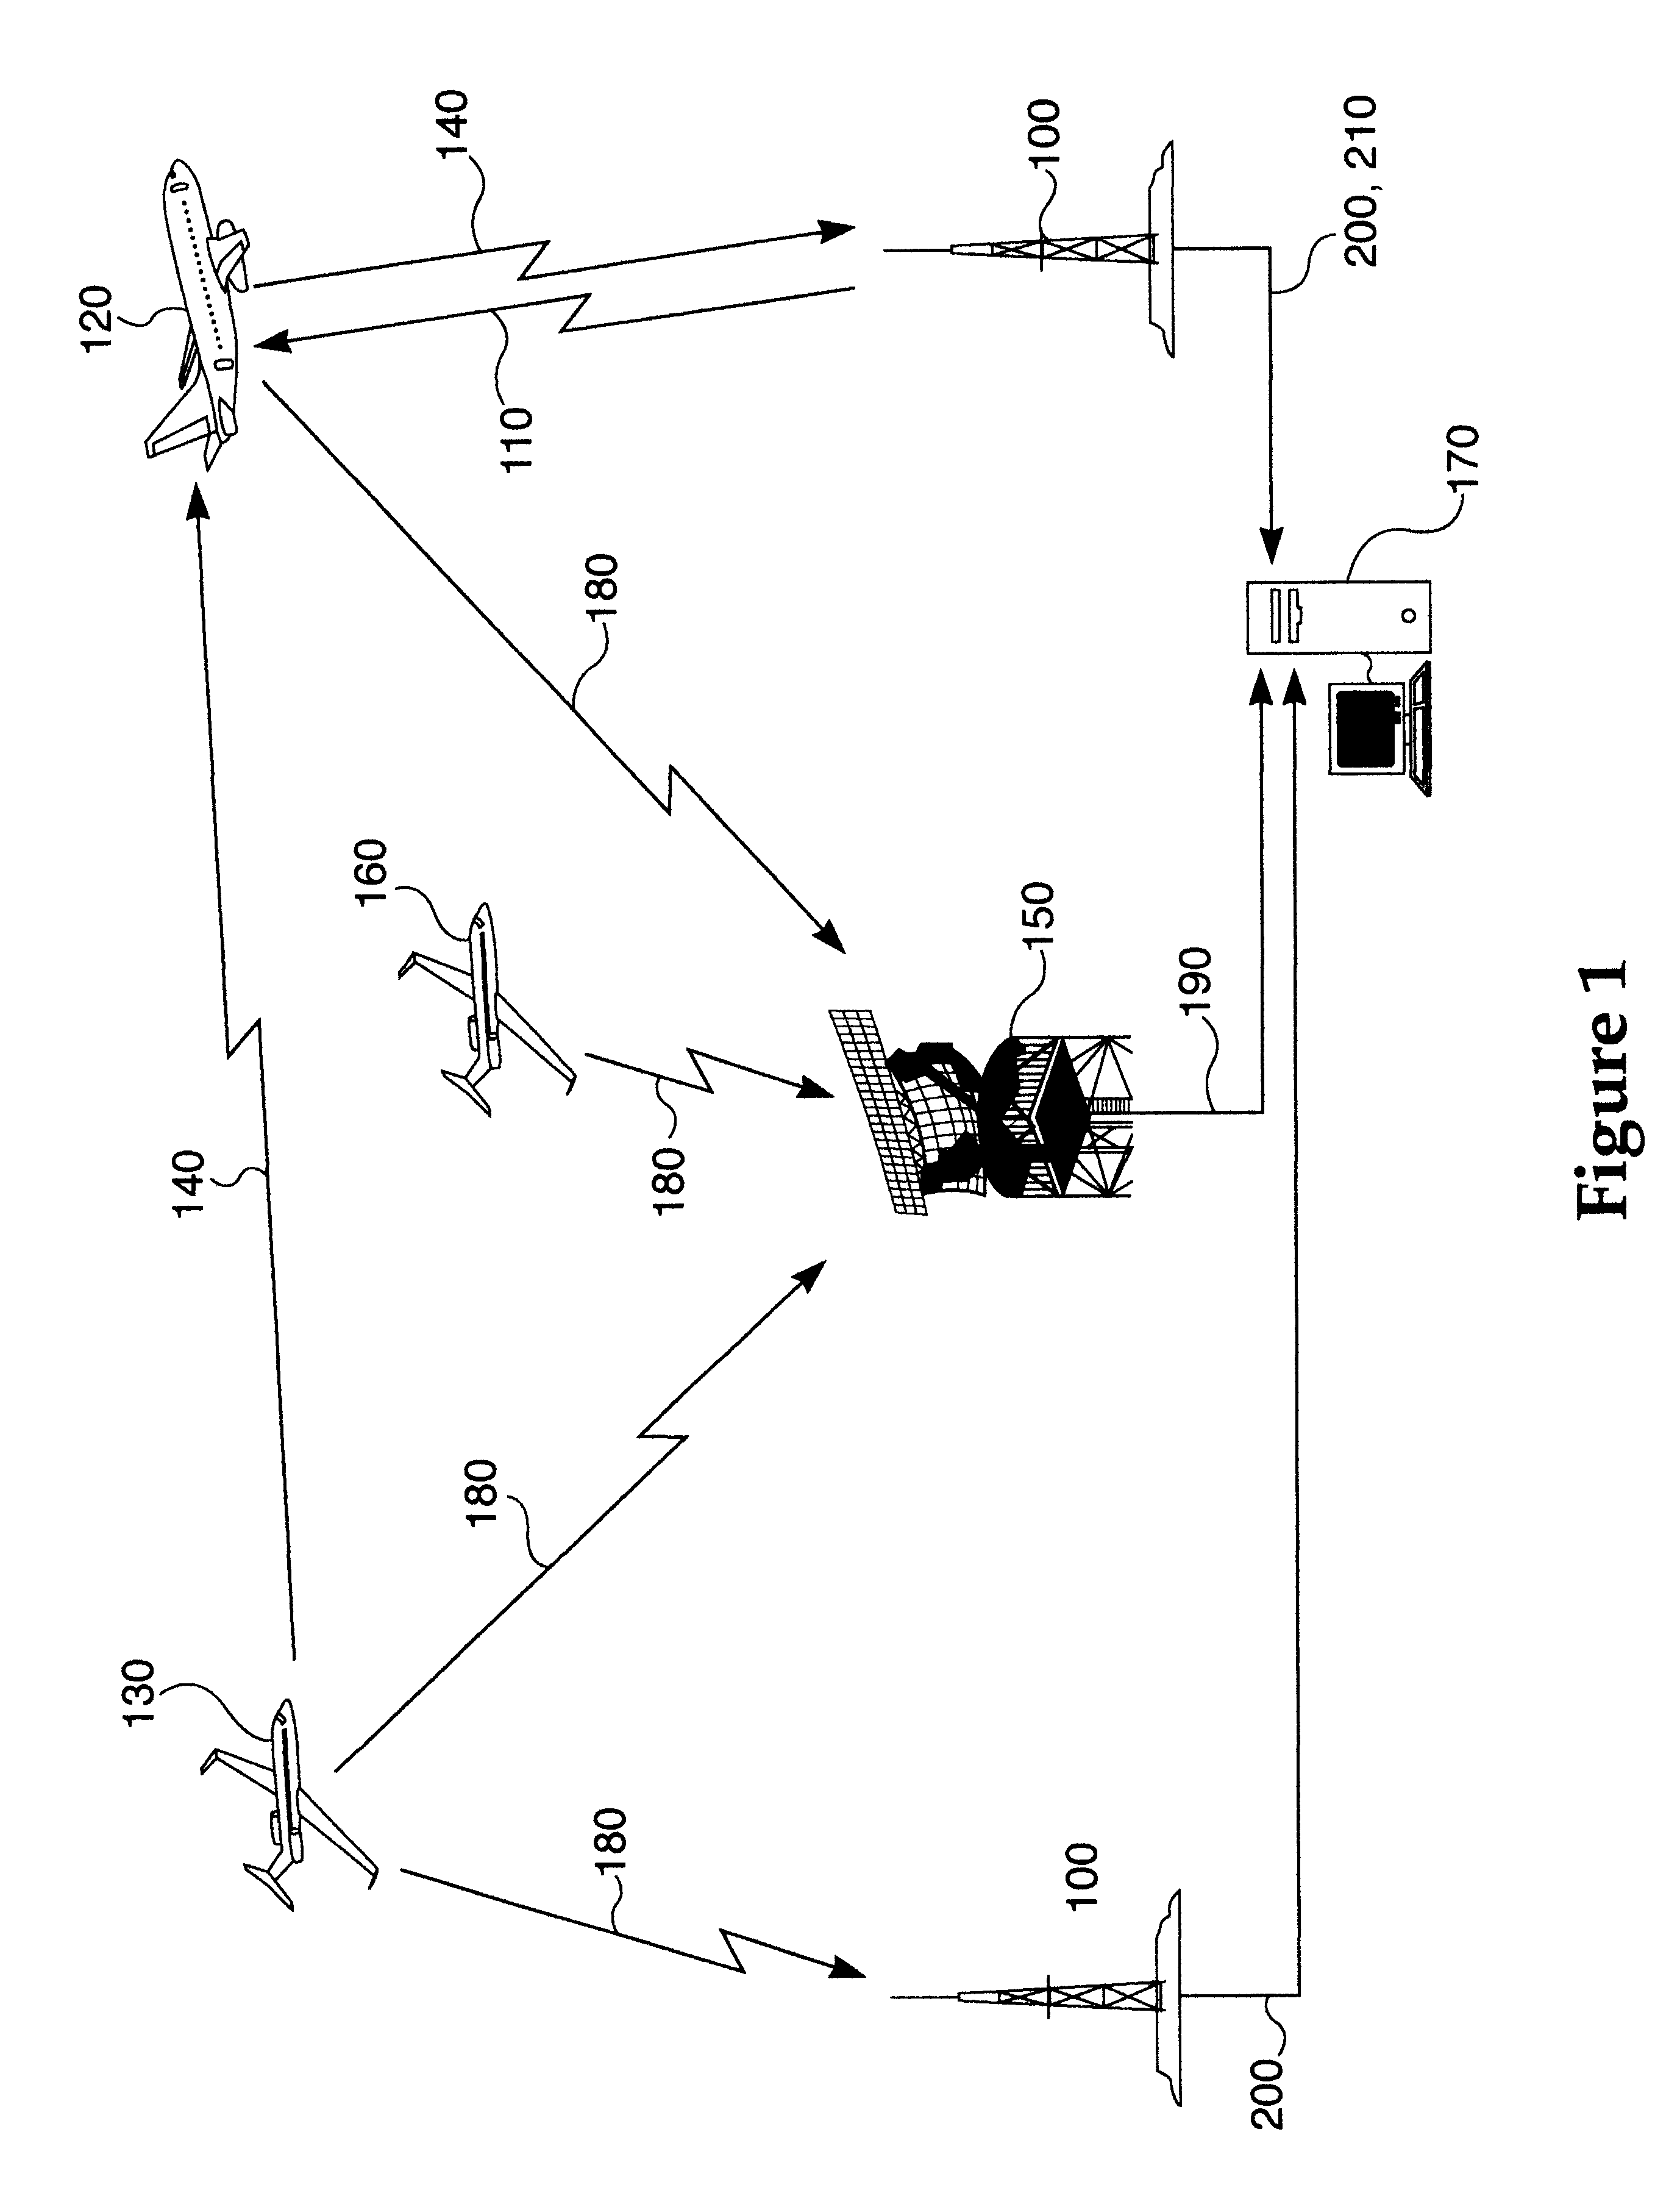 Method and apparatus for improving utility of automatic dependent surveillance